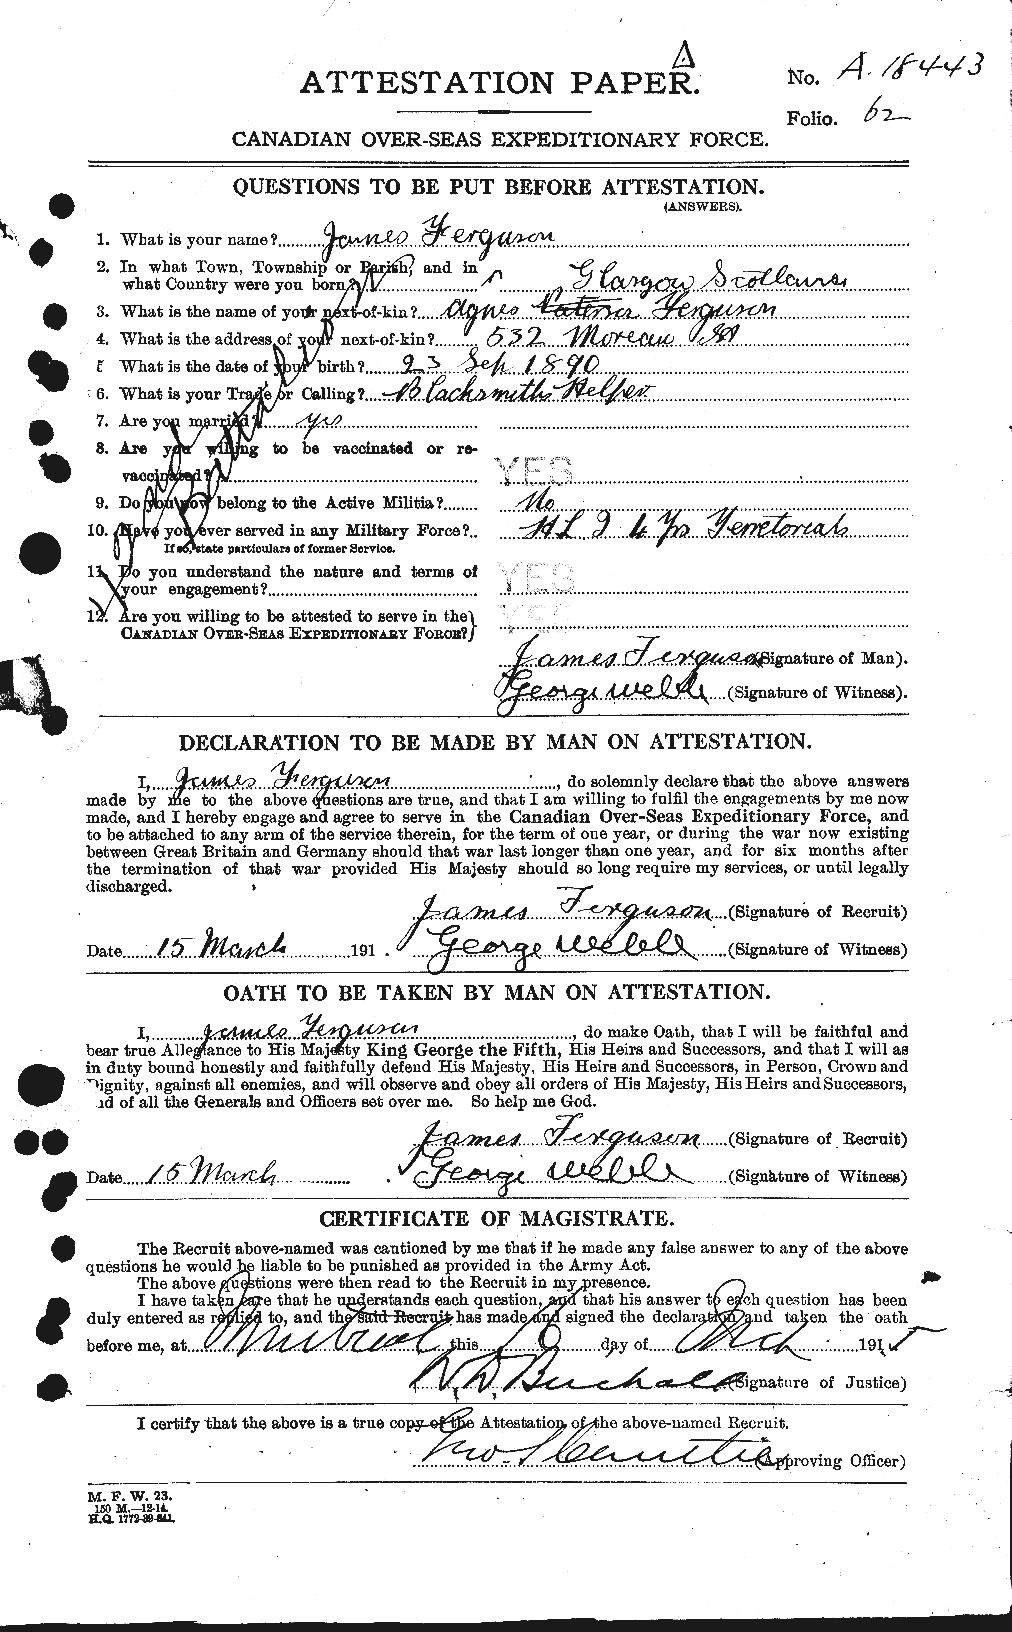 Personnel Records of the First World War - CEF 320243a